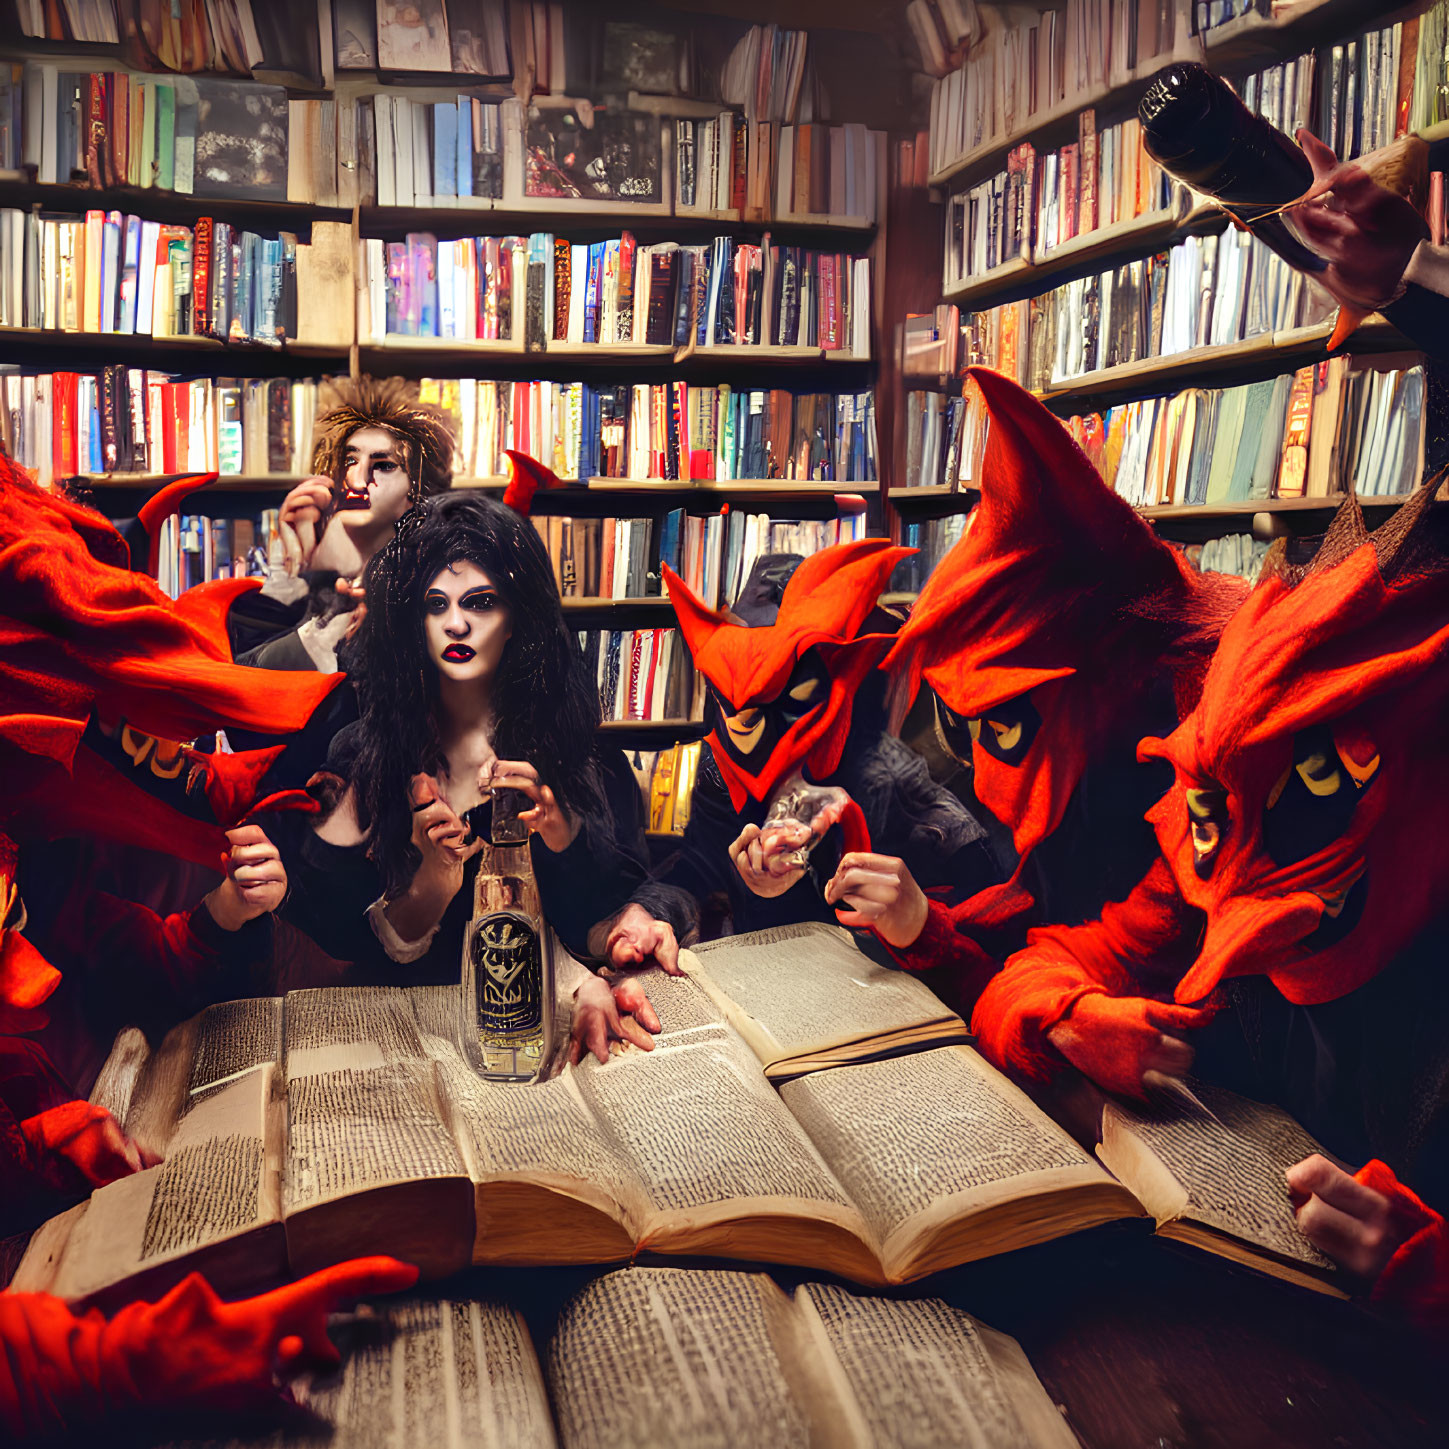 Dark Gothic Characters Surrounded by Menacing Figures in Book-Filled Room